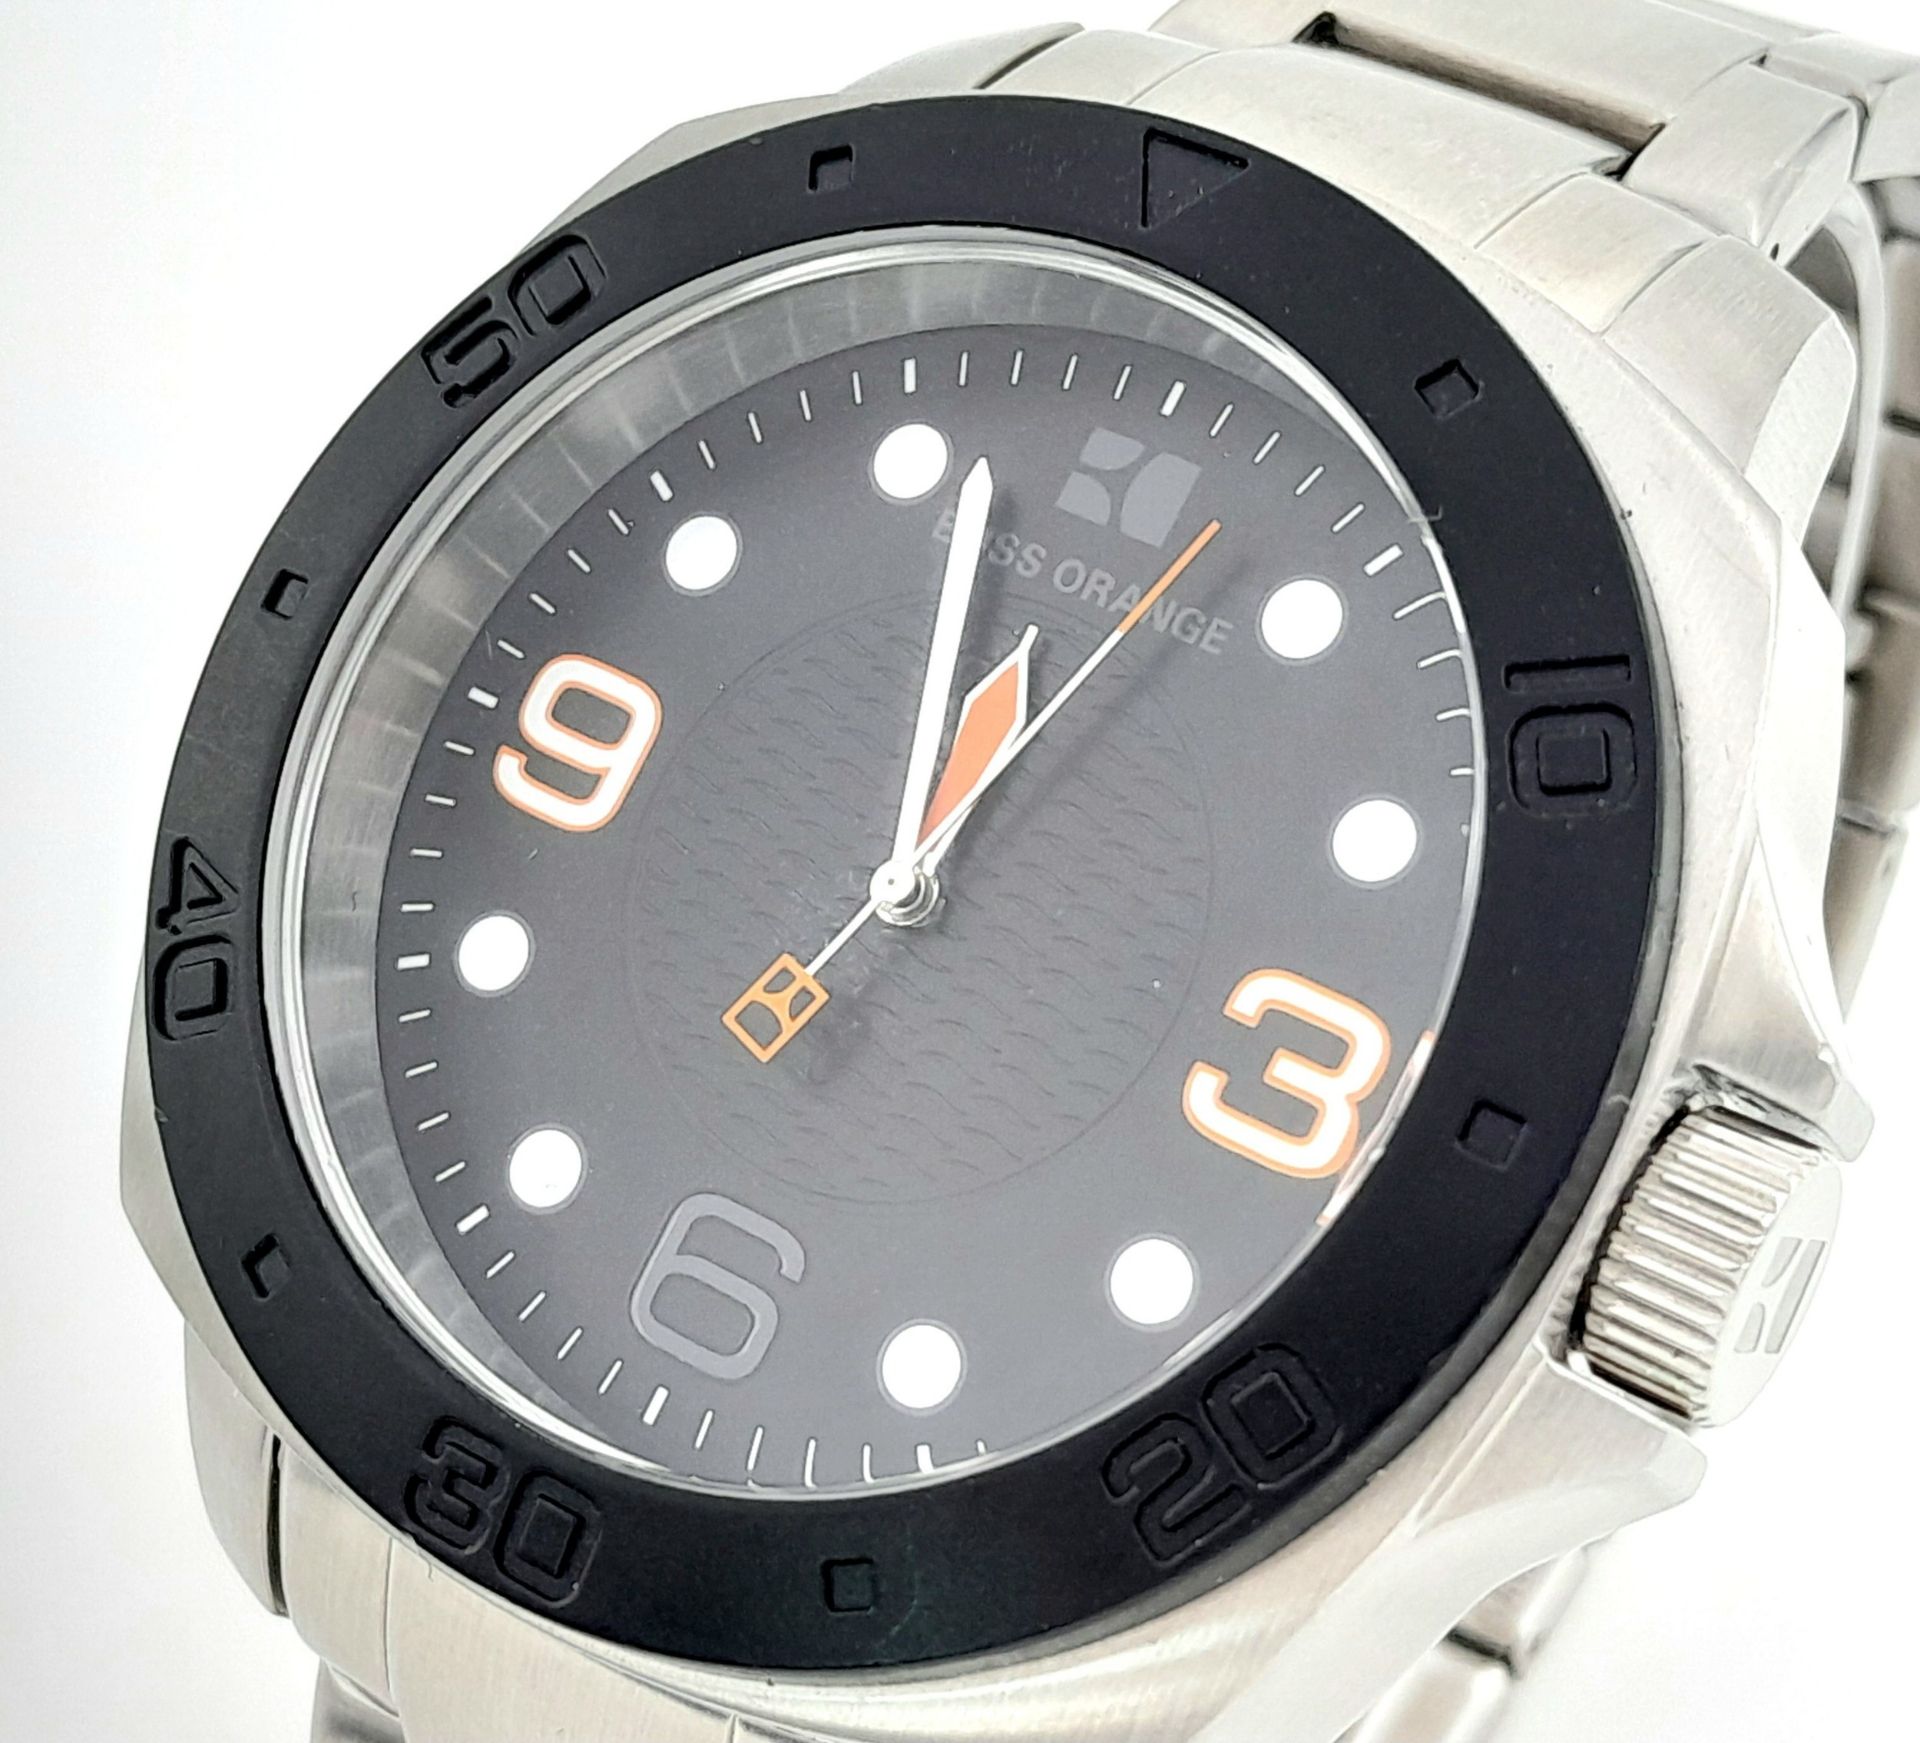 An Excellent Condition Men’s Oversized ‘Boss Orange’ Watch by Hugo Boss (50mm Case). New Battery - Image 3 of 6